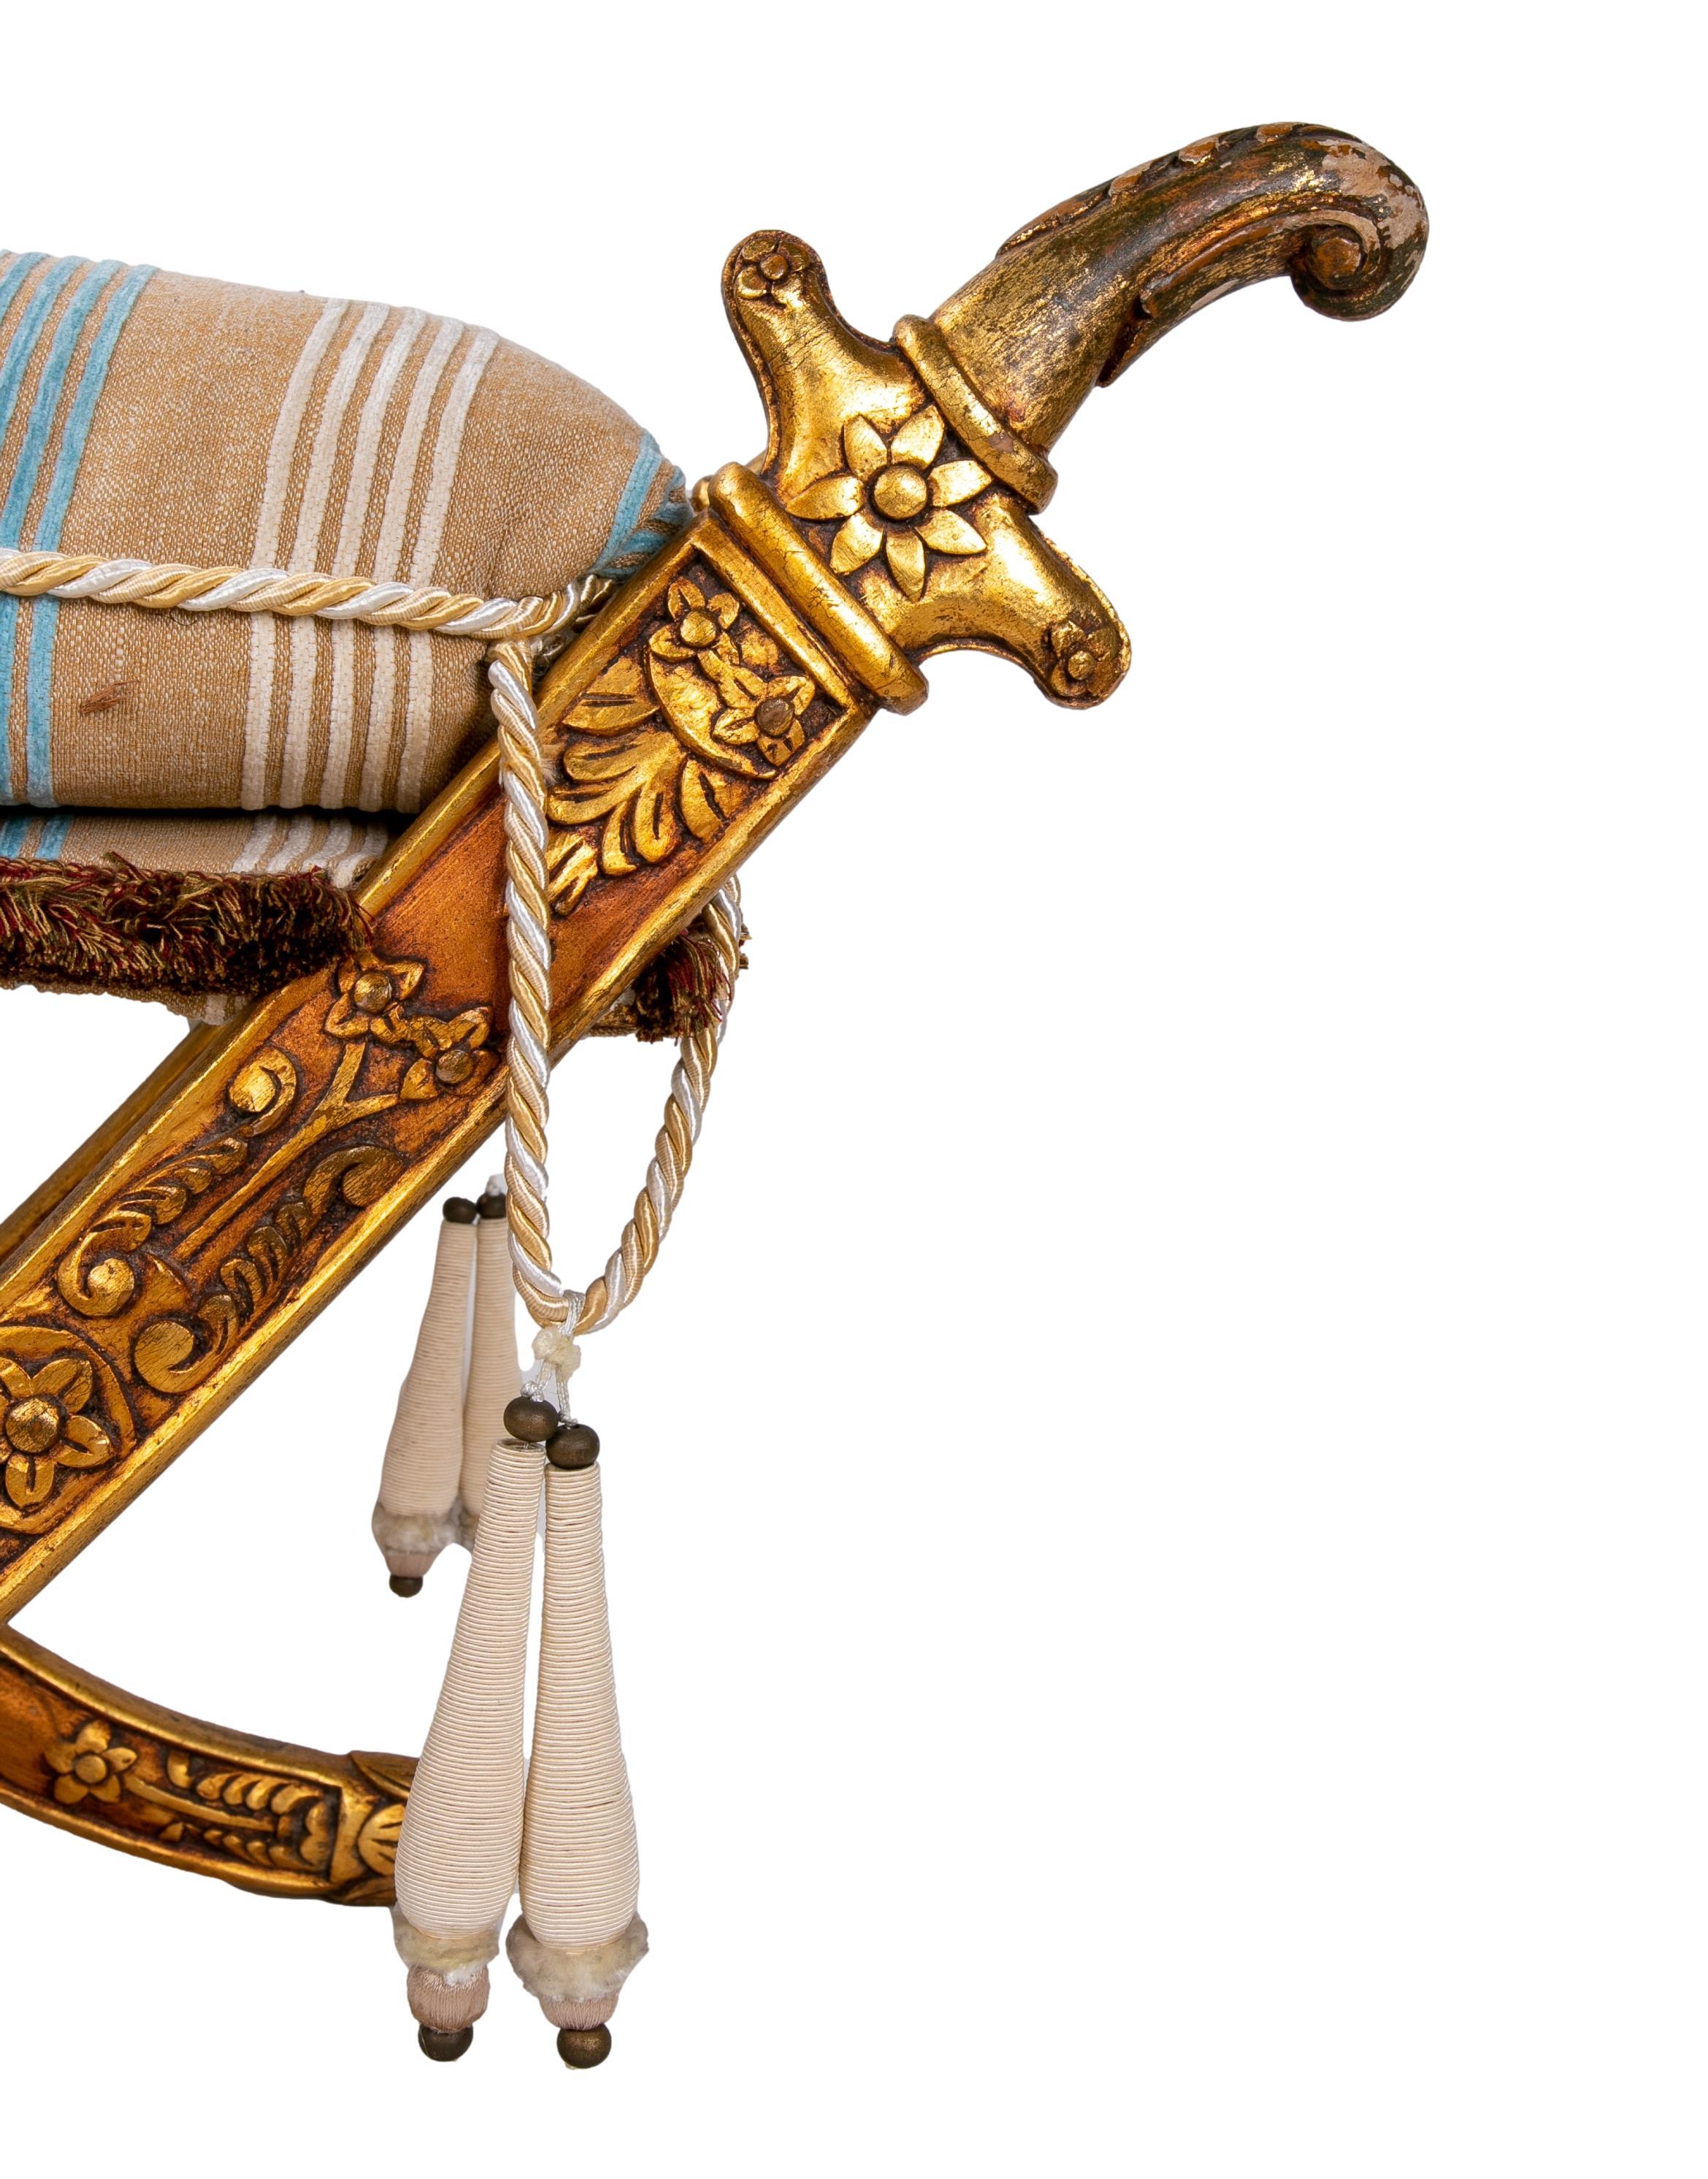 Gilded Wooden Jabuga with Legs in the Shape of Arabian Swords For Sale 5